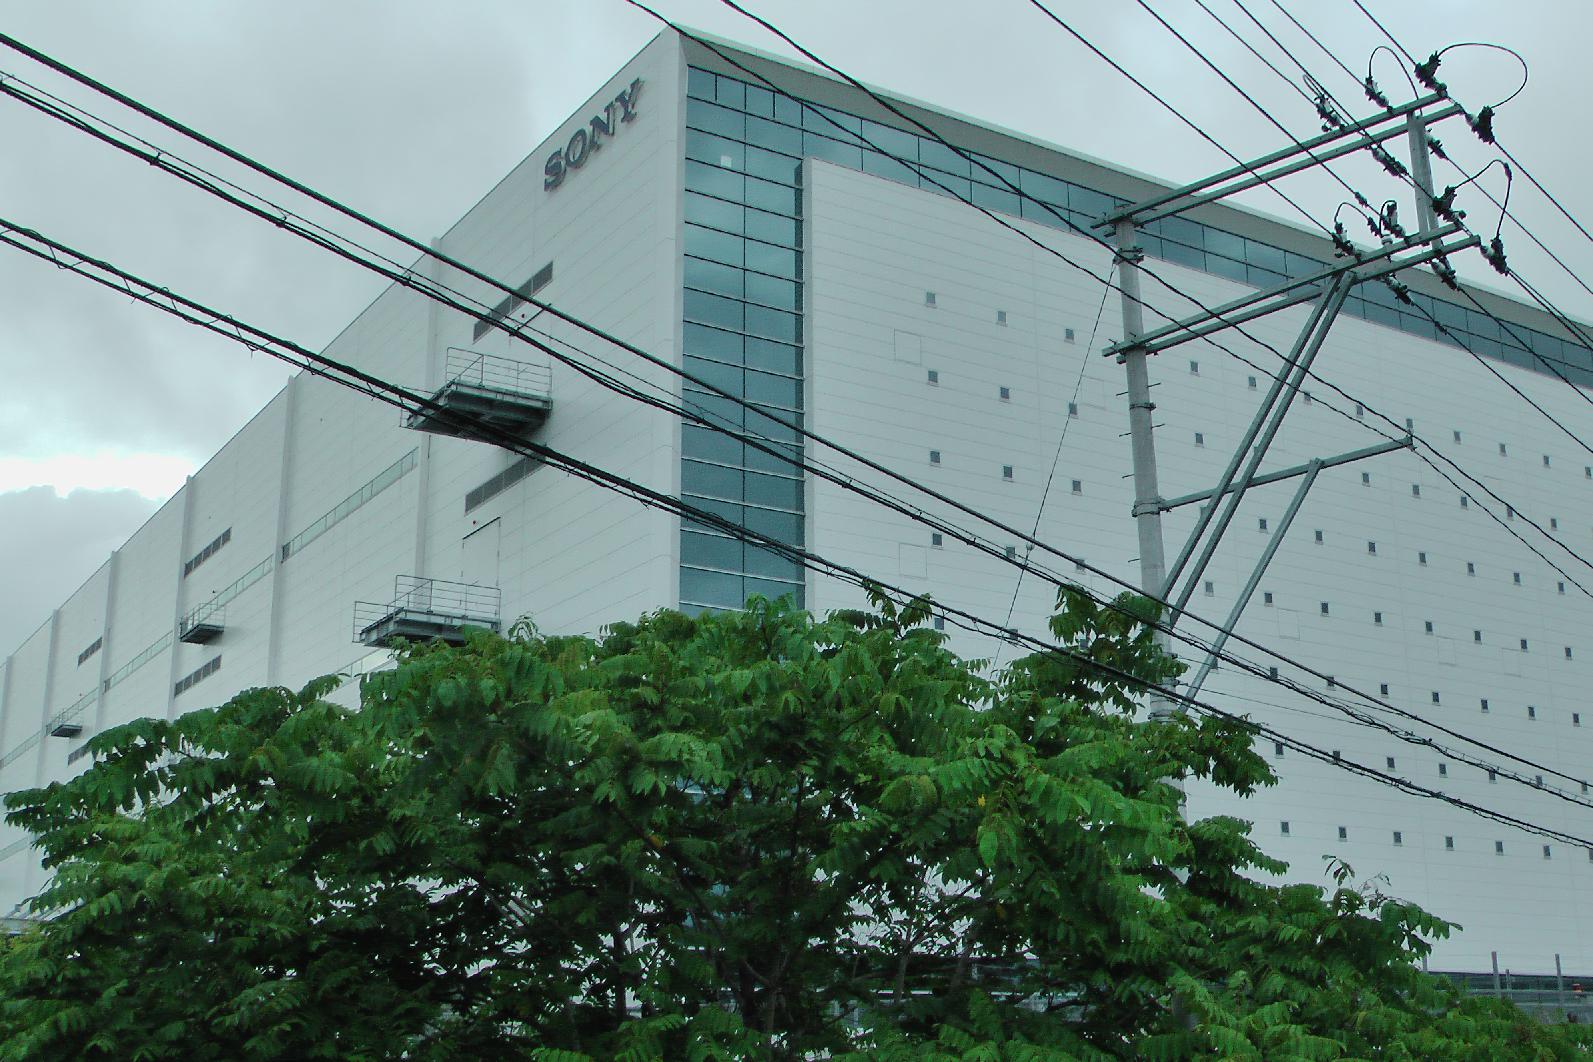 Sony's battery and accumulator factories in Motomiya